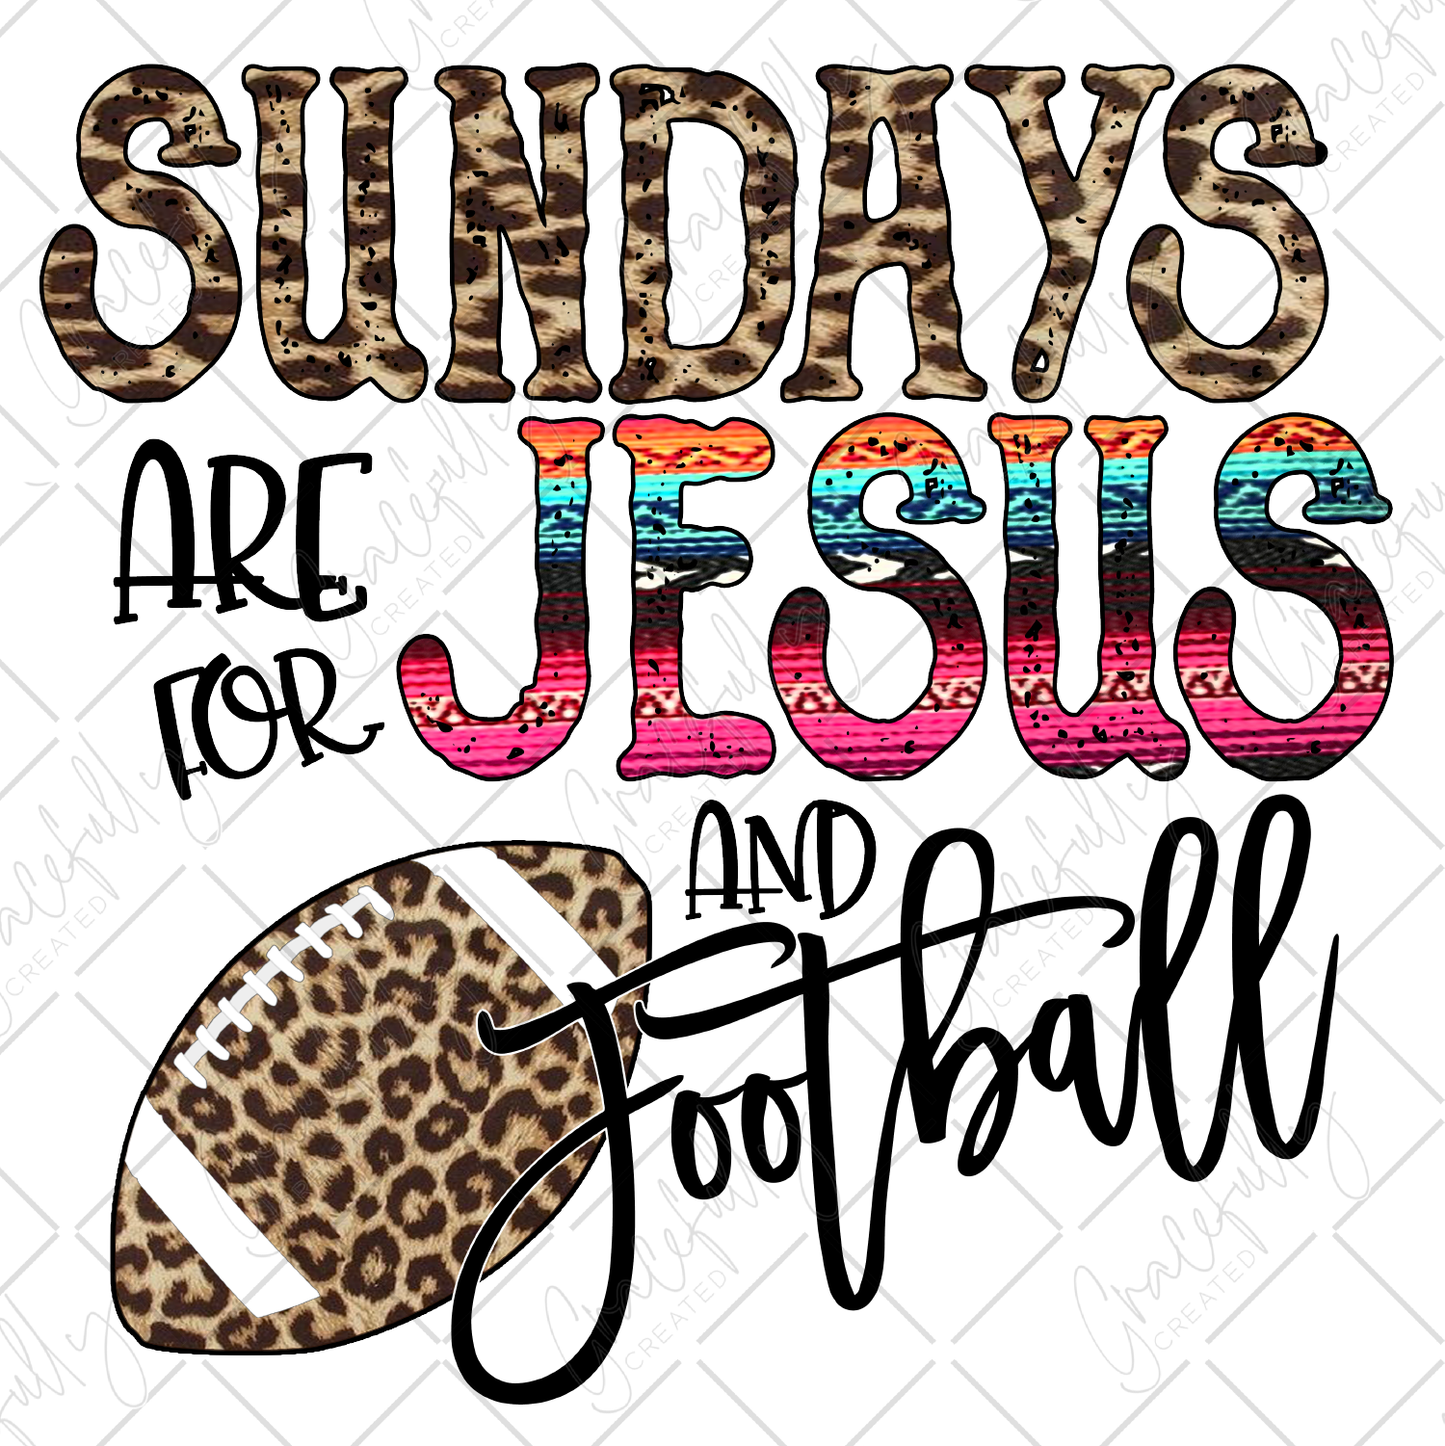 W8 Sundays are for Jesus and Football